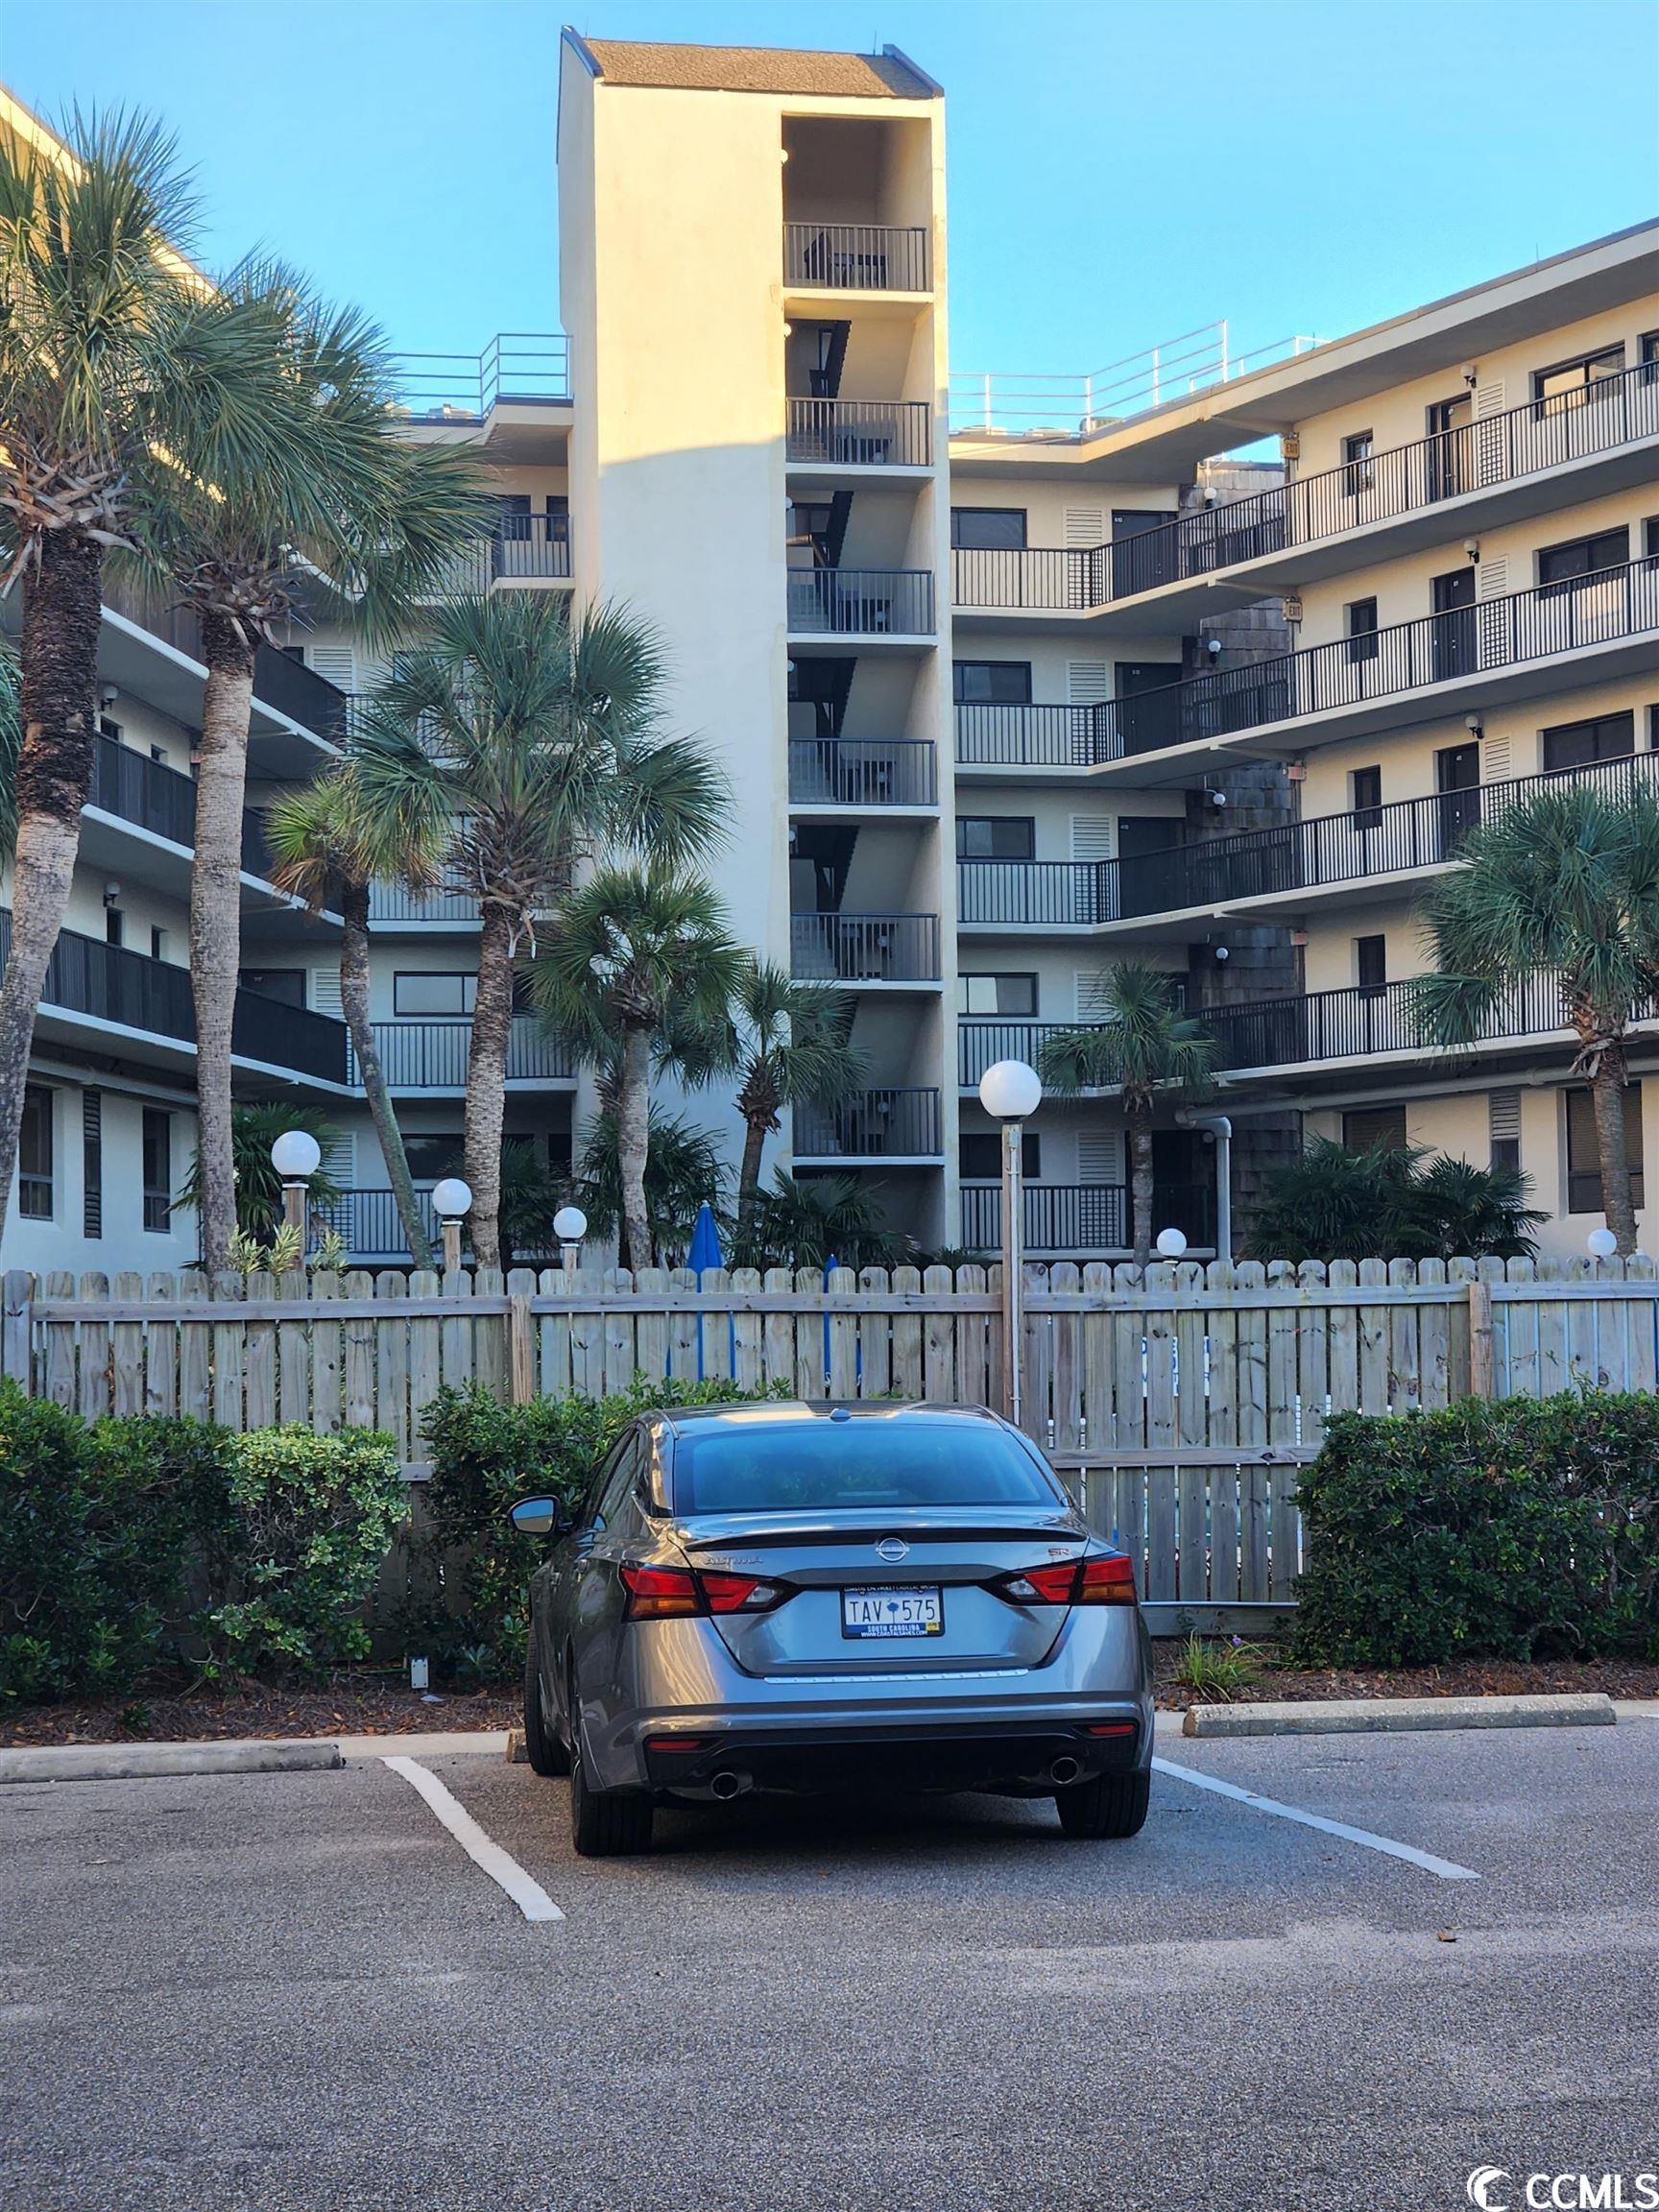 the beach is calling for you!!!! this 2-bedroom 1.5 bath condo is across the street from the beach and perfect home to make your personal touches. a very clean condo used as a second home. beach access is across the street which features handicapped access onto the beach. there is a large pool and grills and seating for a nice relaxing evening outside. there is a new washer/dryer installed on each floor. no pets are allowed.  come make this your vacation home, primary home or rental. litchfield retreat are the only condos on n. litchfield beach. easy access to shopping, golfing, great restaurants, historic georgetown and you are 20 minutes from myrtle beach and airport.